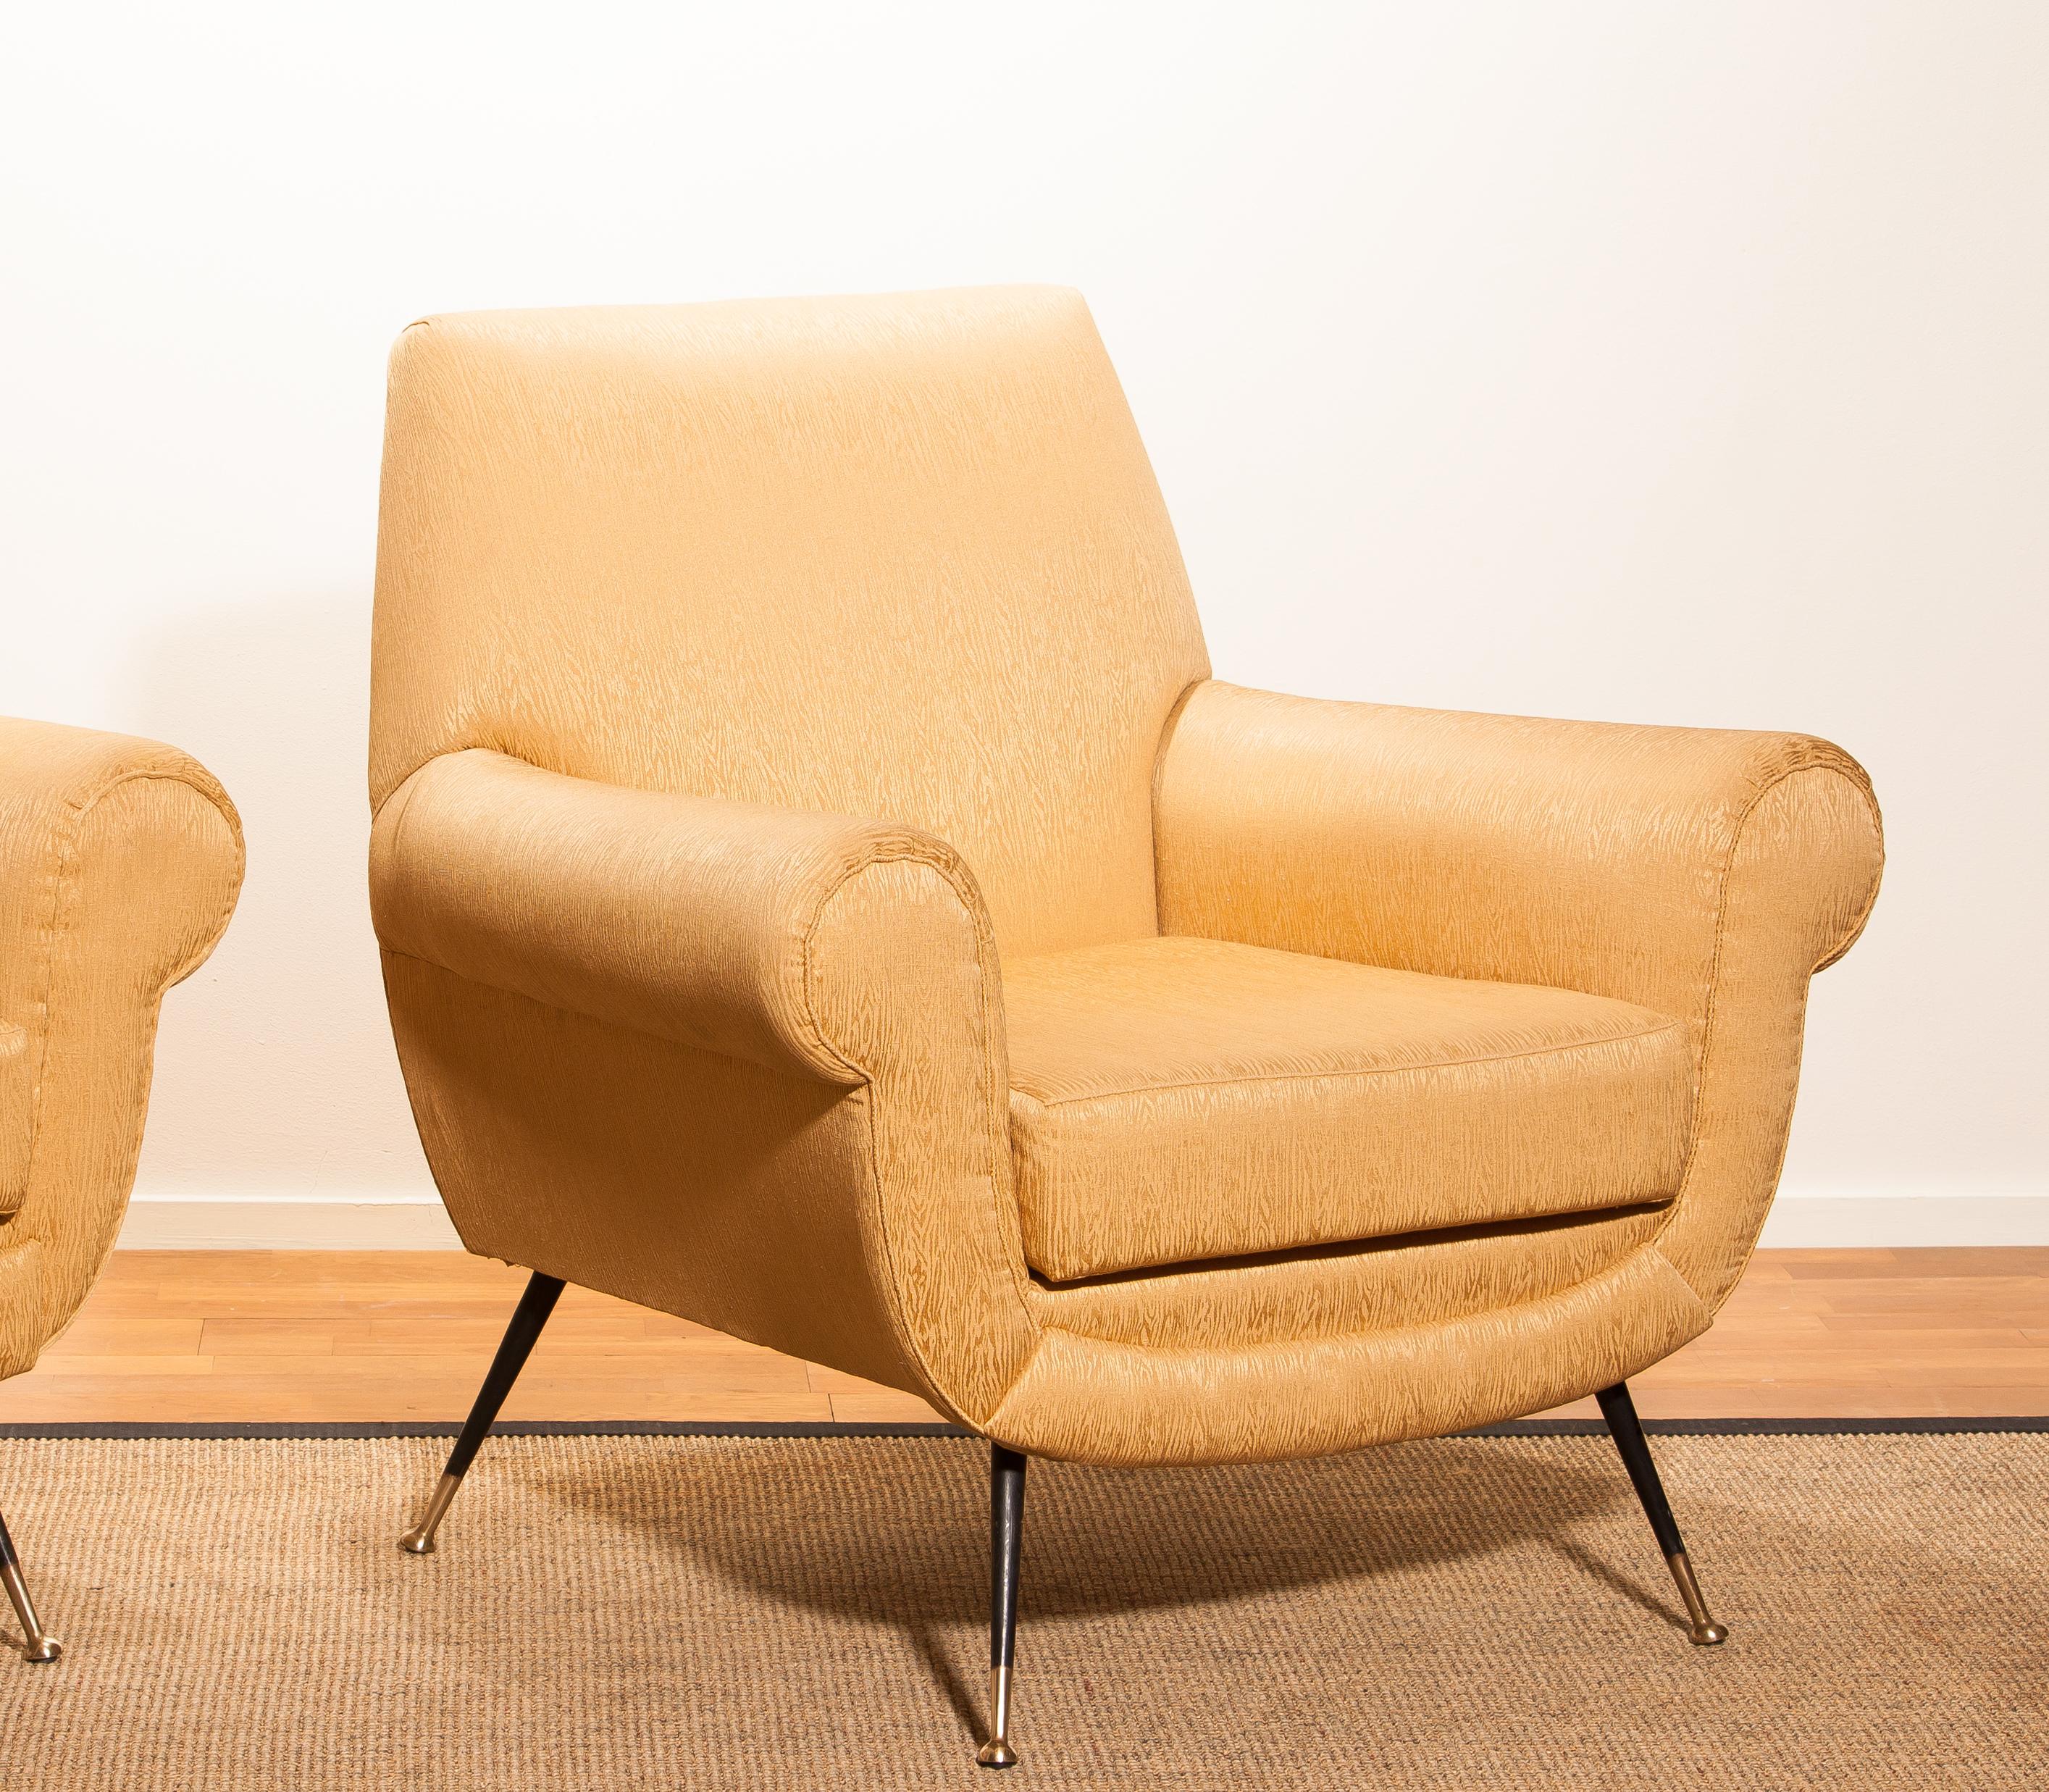 1950s, Brass and Golden Jacquard Set Lounge Chairs by Gigi Radice for Minotti 6